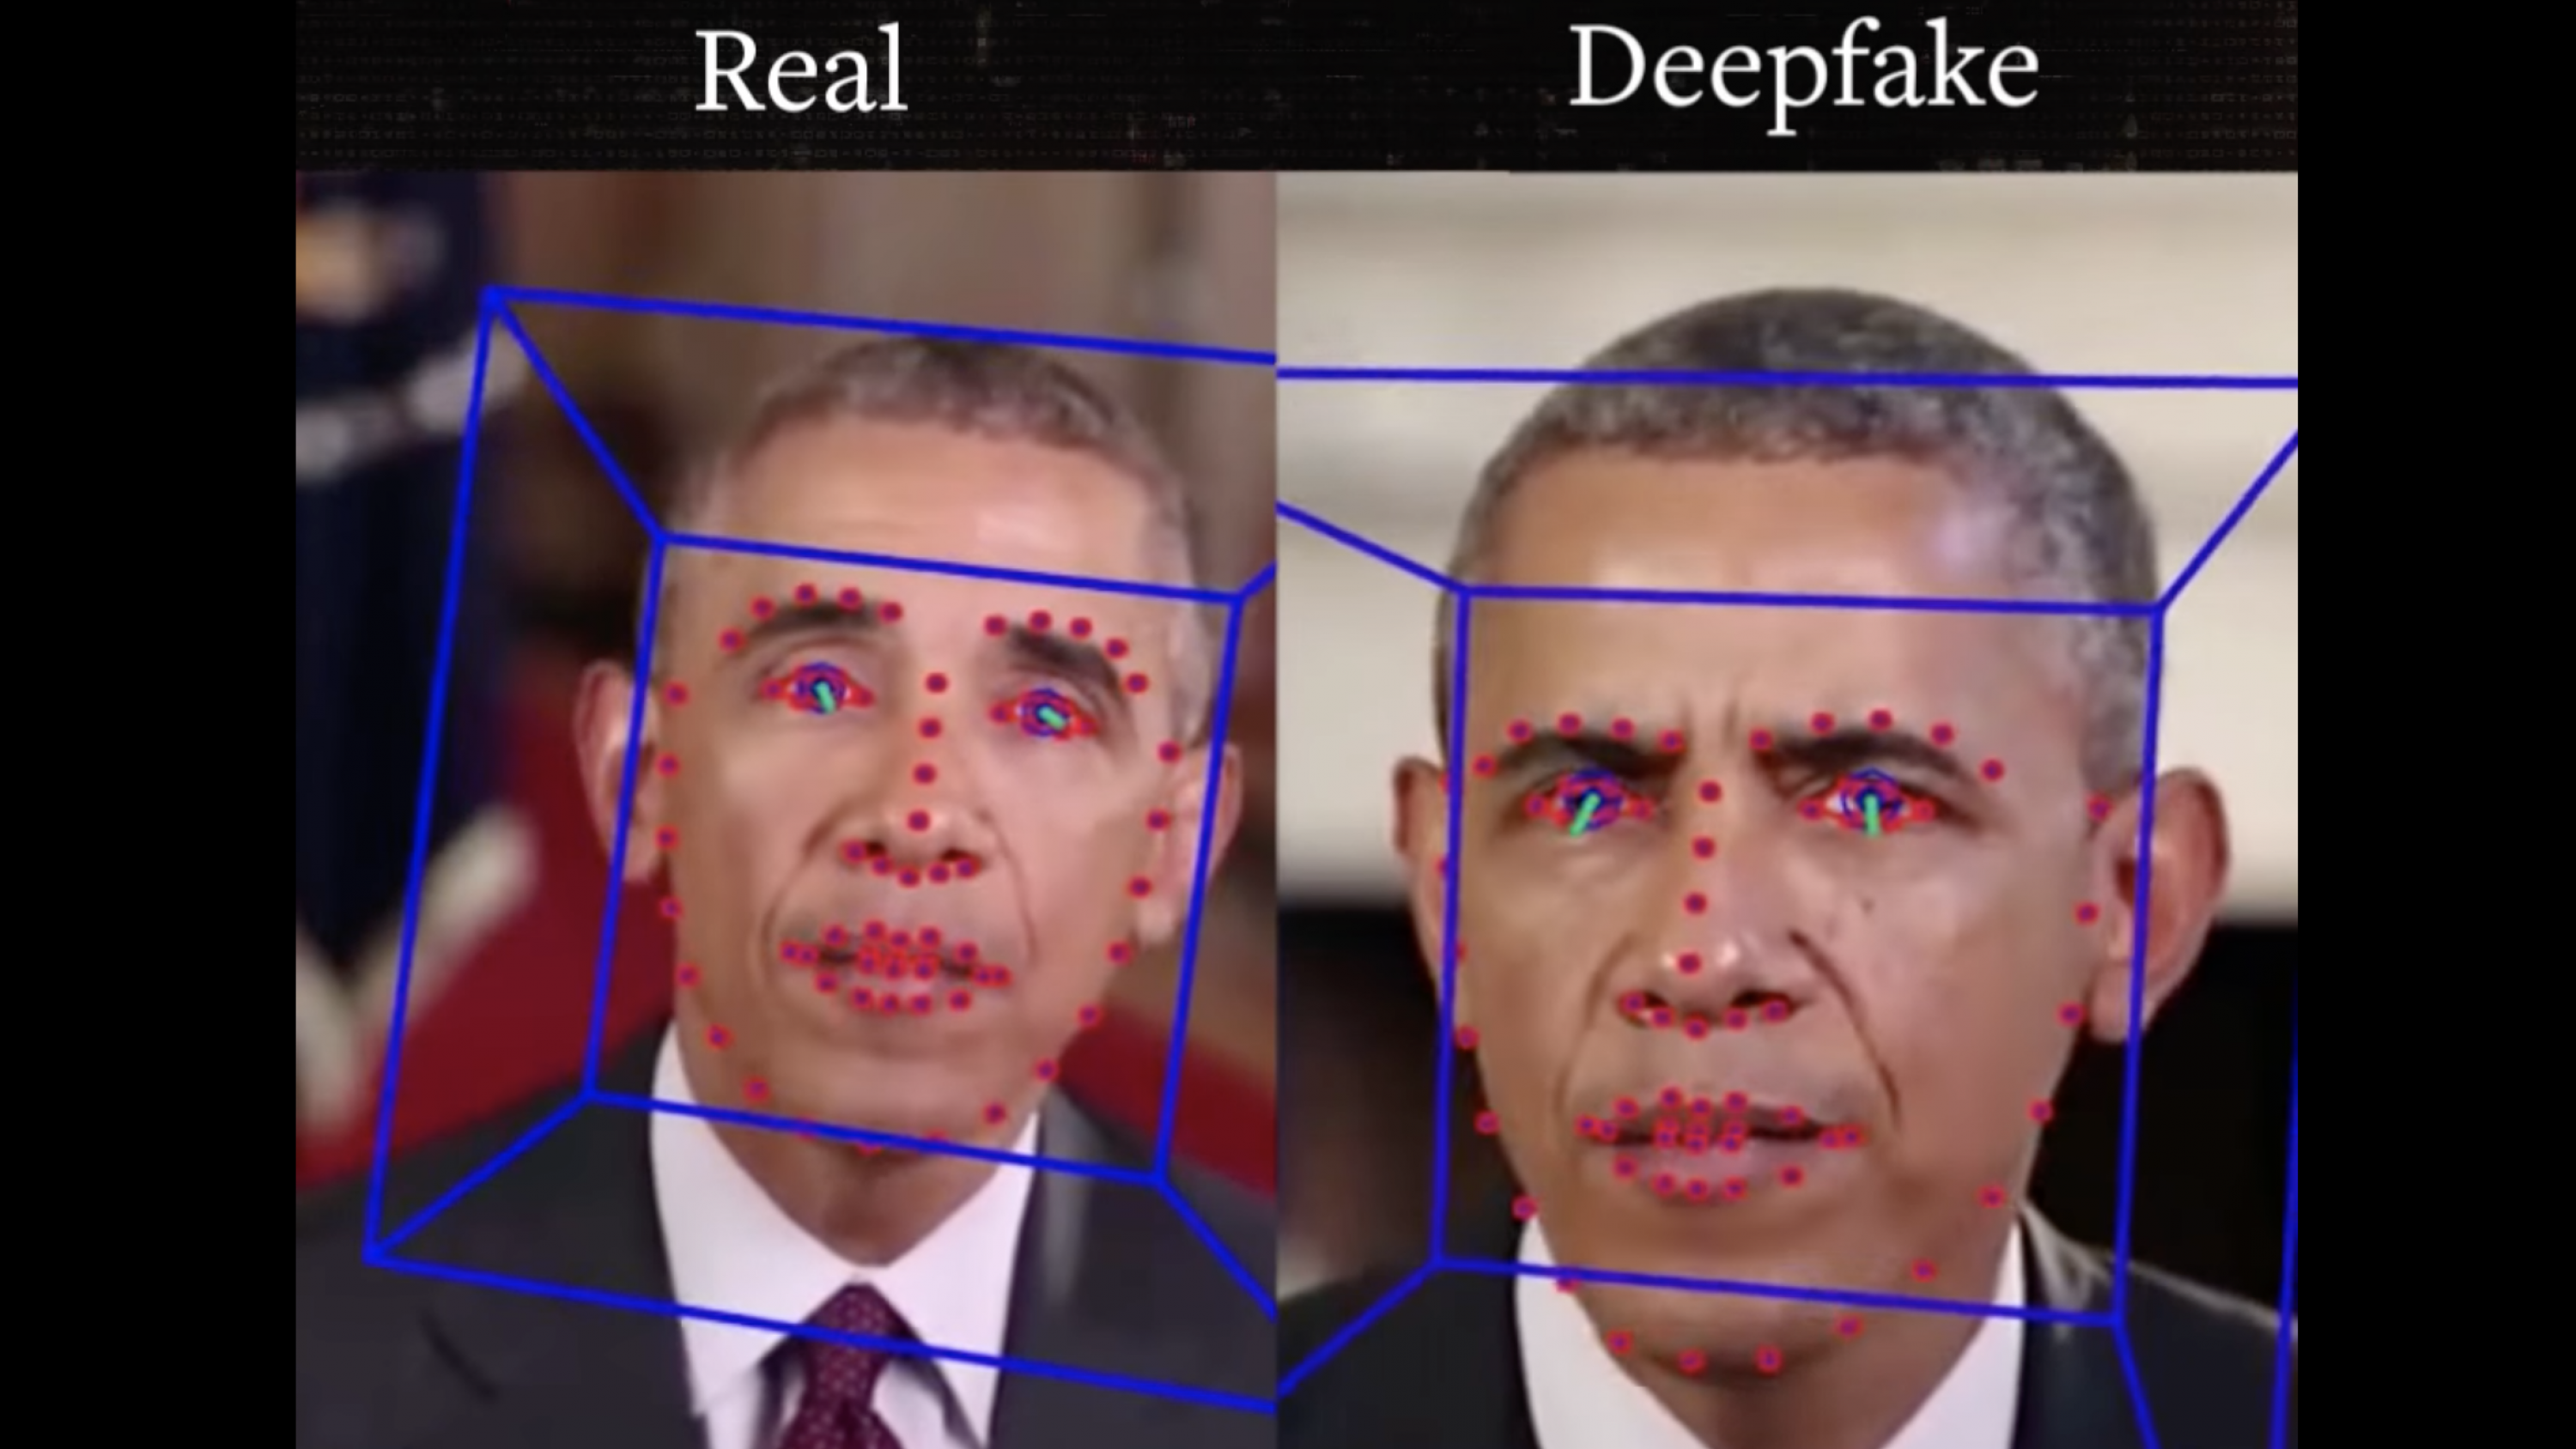 side by side image of real and fake Obama headshot